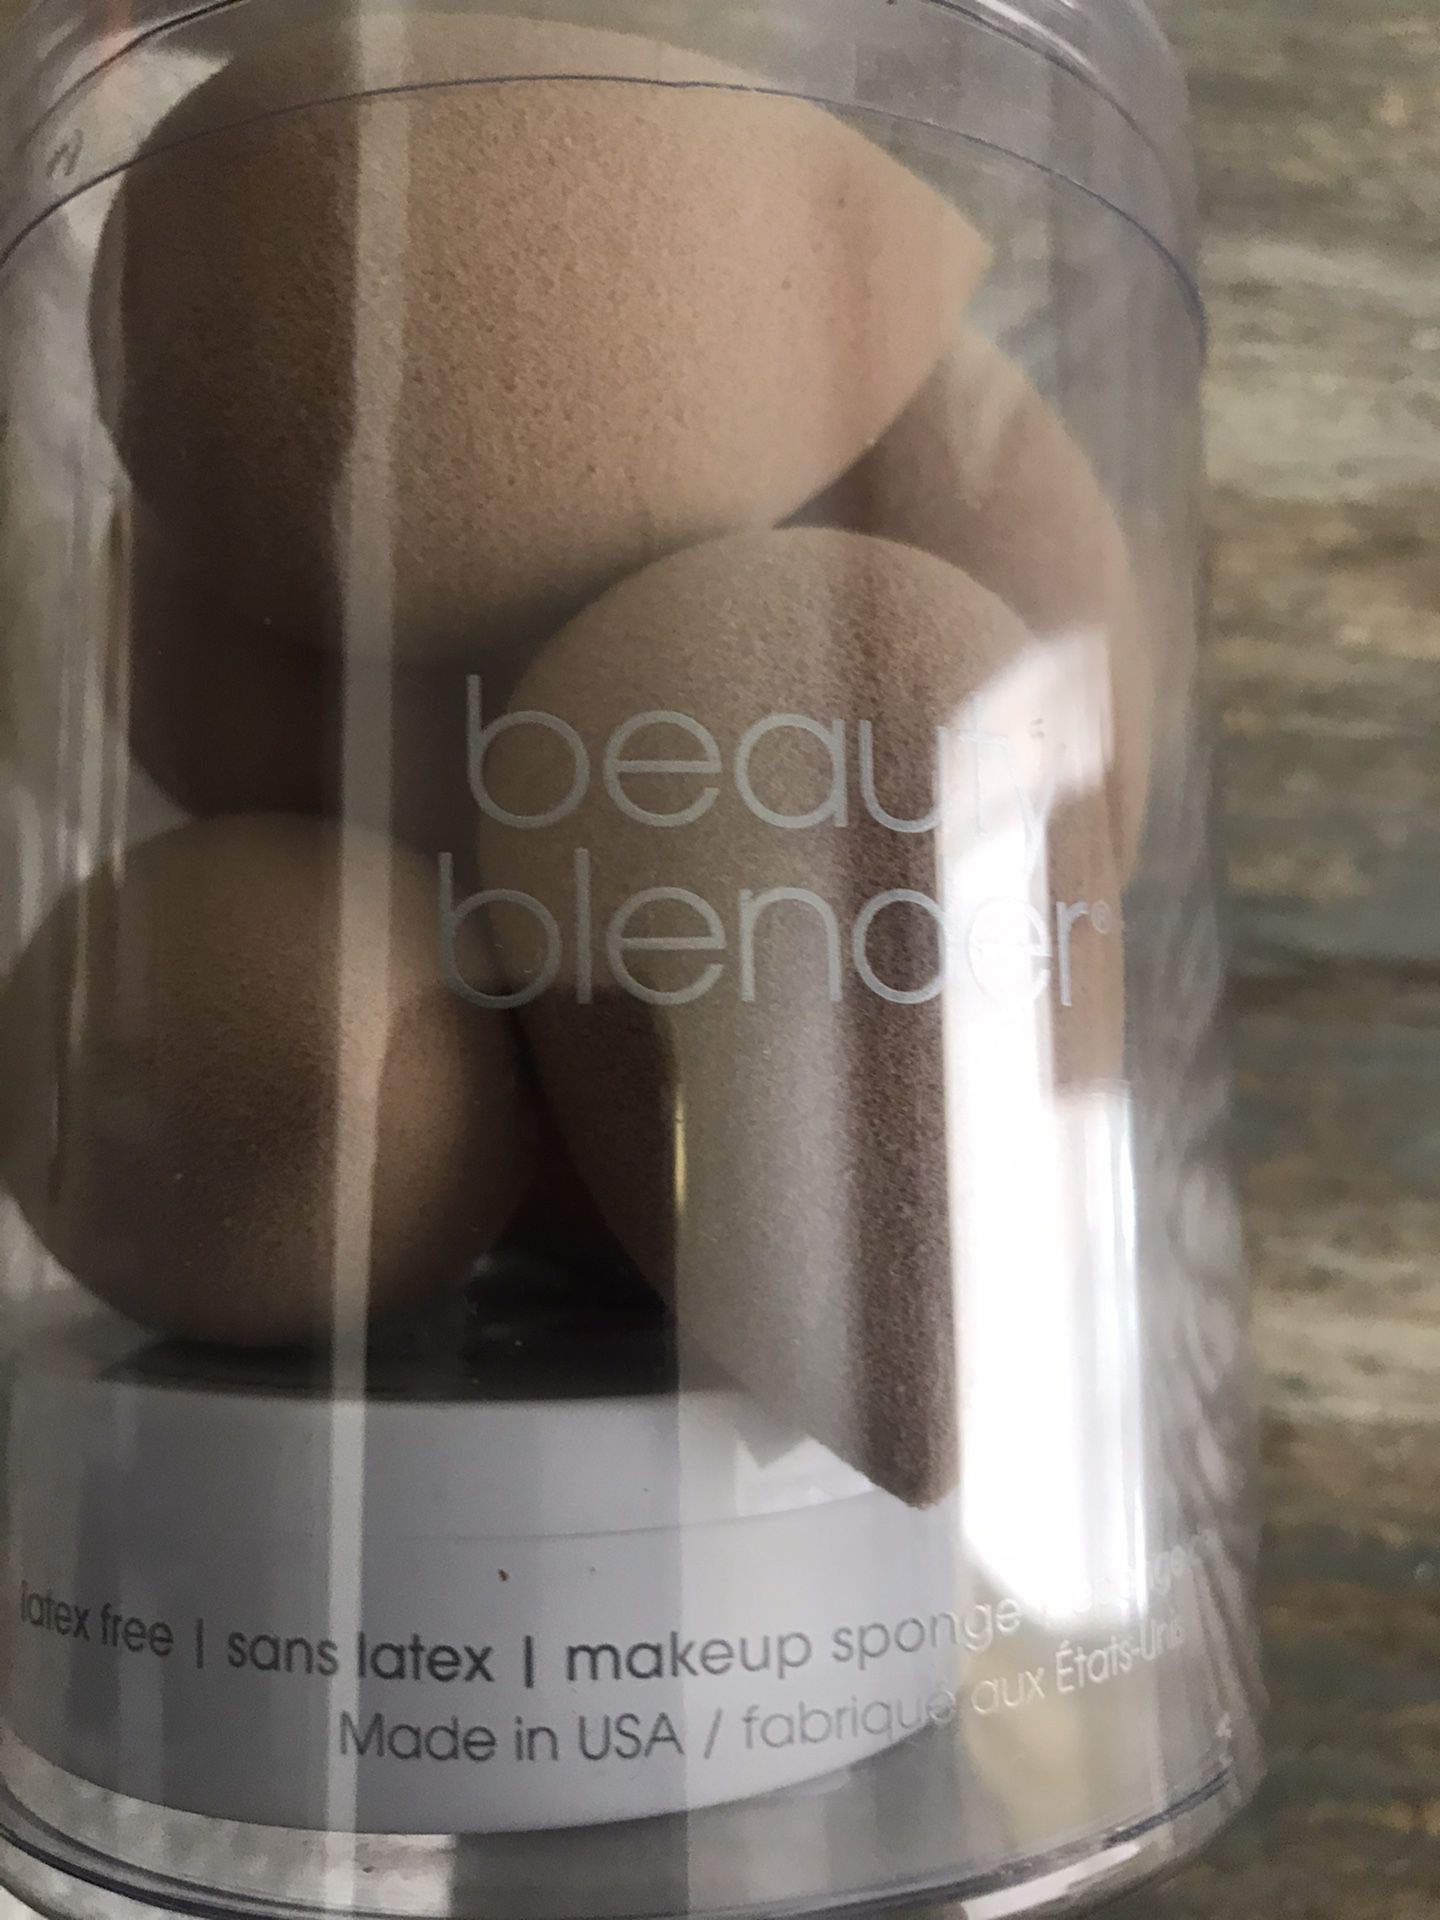 6 Nude Beauty Blender + Solid Kit Proof of Purchase in last picture